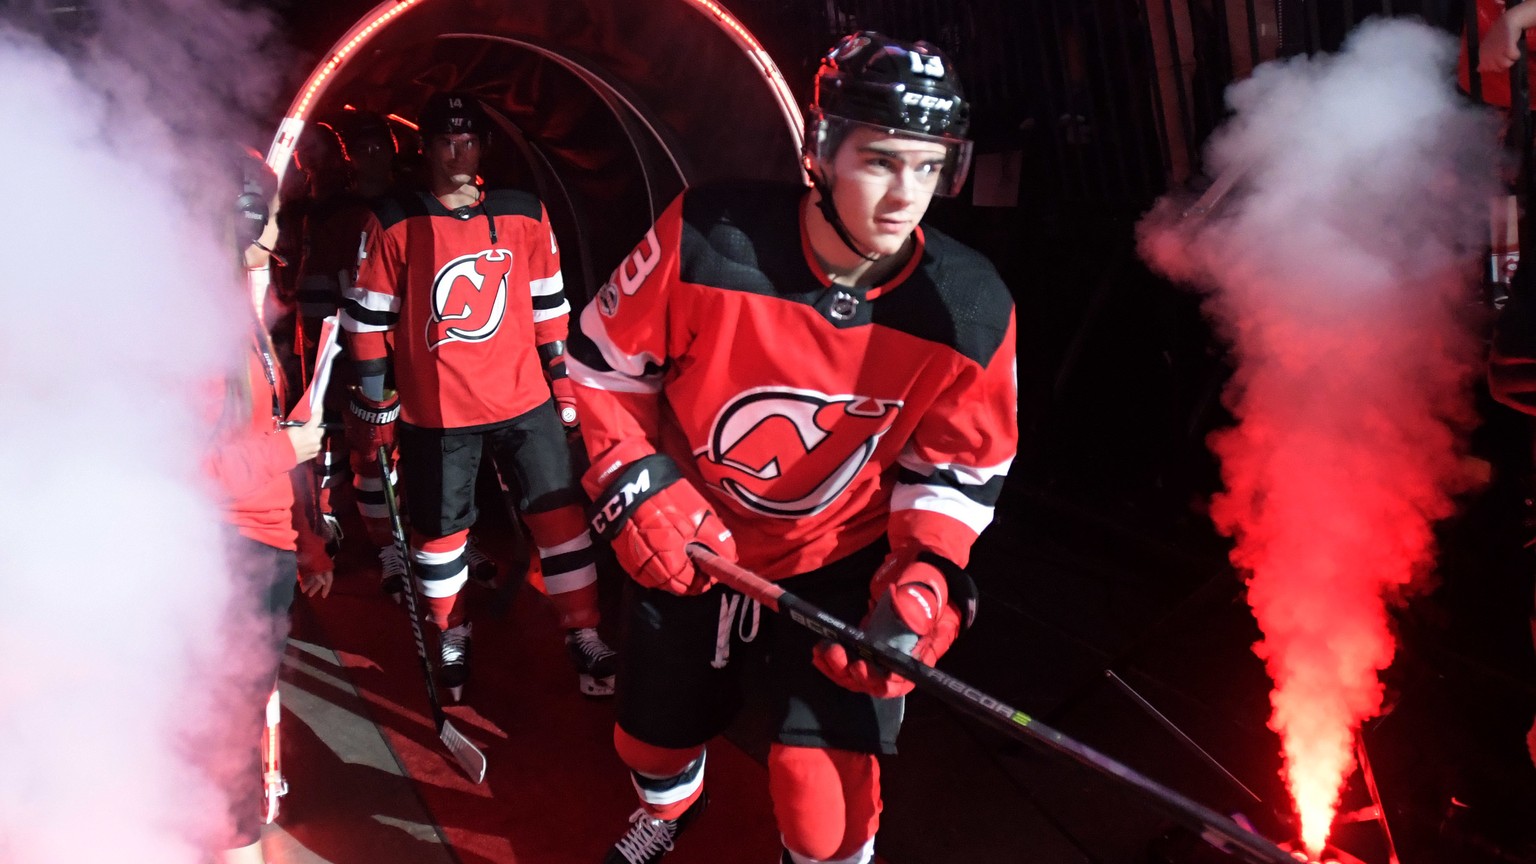 New Jersey Devils center Nico Hischier comes onto the ice before an NHL hockey game against the Colorado Avalanche Saturday, Oct. 7, 2017, in Newark, N.J. (AP Photo/Bill Kostroun)